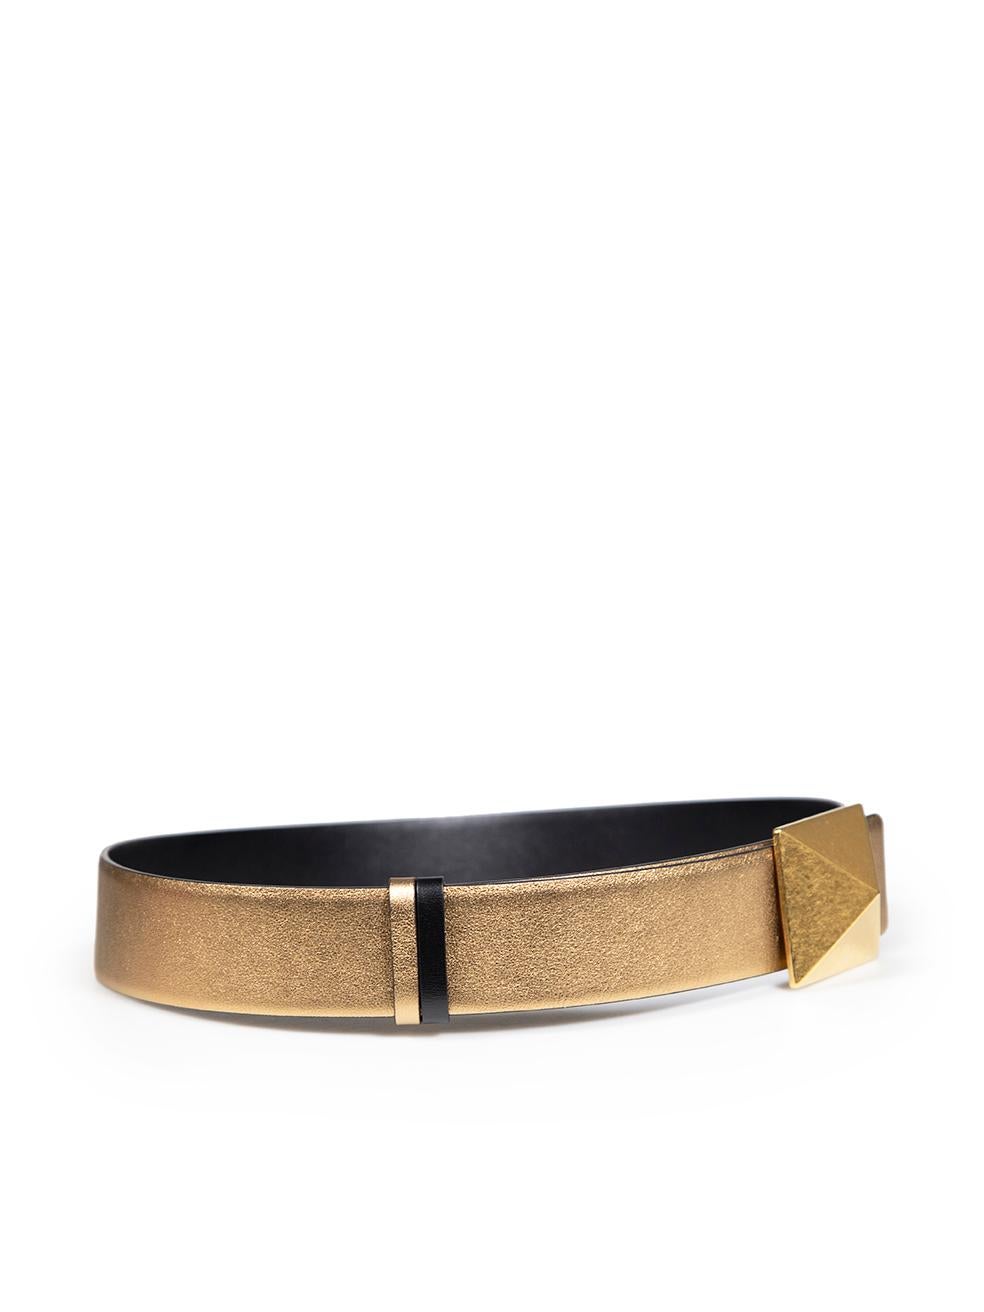 CONDITION is Very good. Minimal wear to belt is evident. Minimal wear to the buckle hardware surface where one or two hardly noticeable scratches are found on this used Valentino designer resale item.
 
 
 
 Details
 
 
 Black and gold
 
 Leather
 
